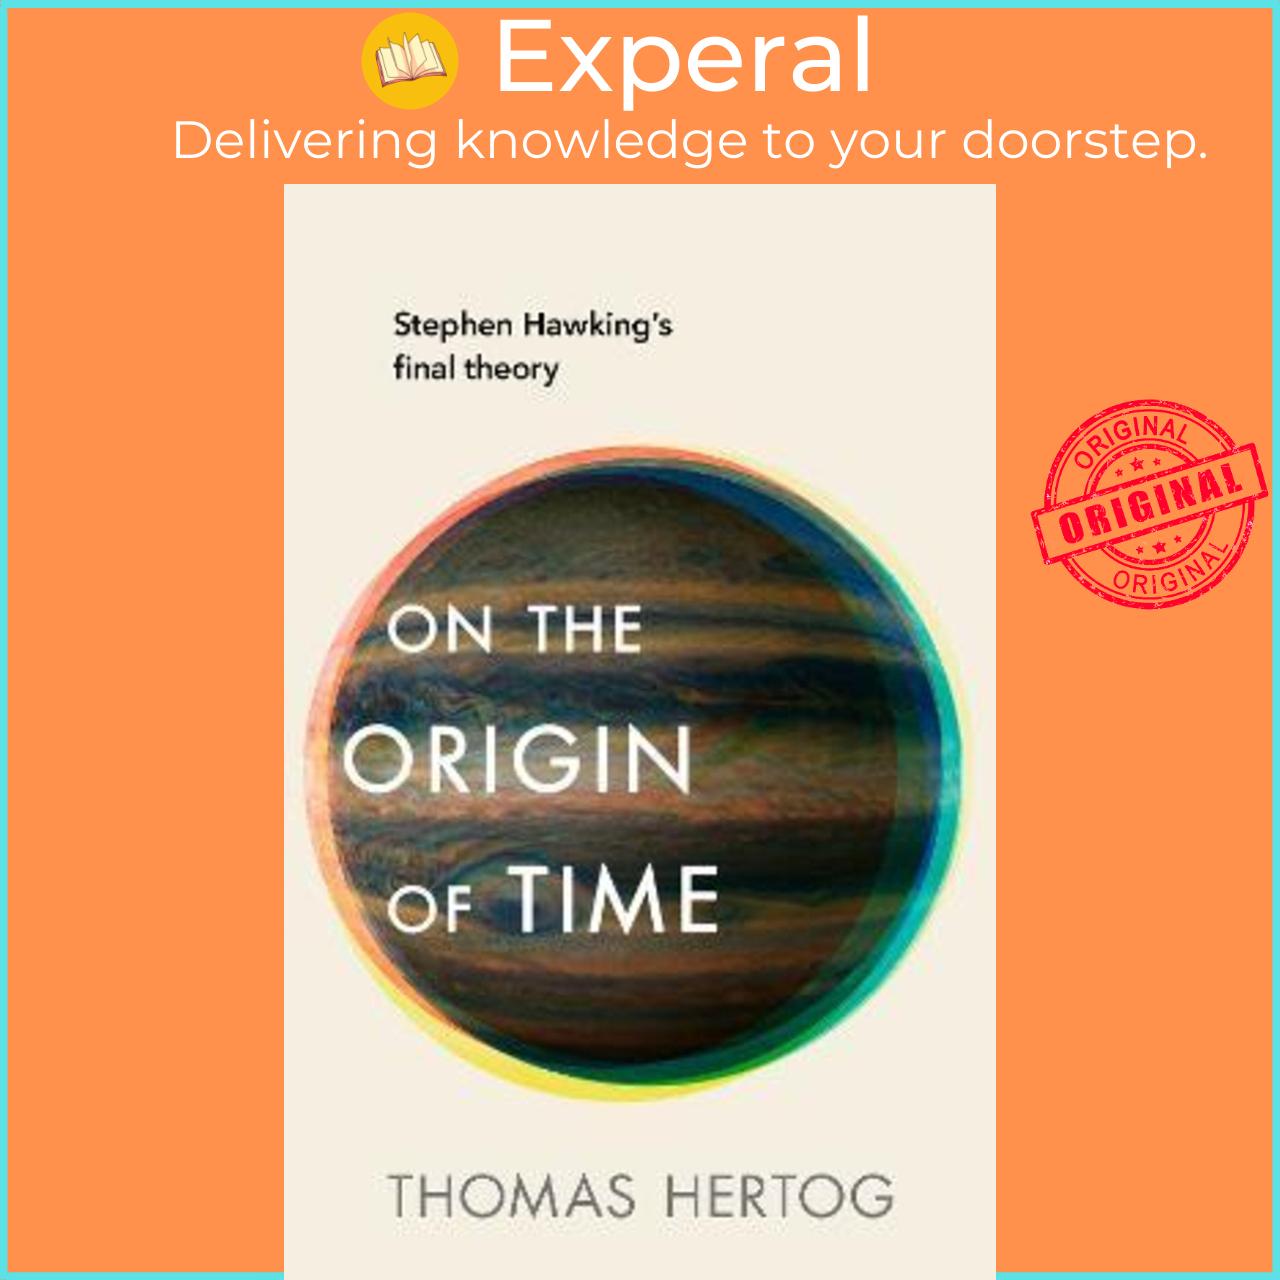 Hình ảnh Sách - On the Origin of Time : Stephen Hawking's final theory by Thomas Hertog (UK edition, hardcover)